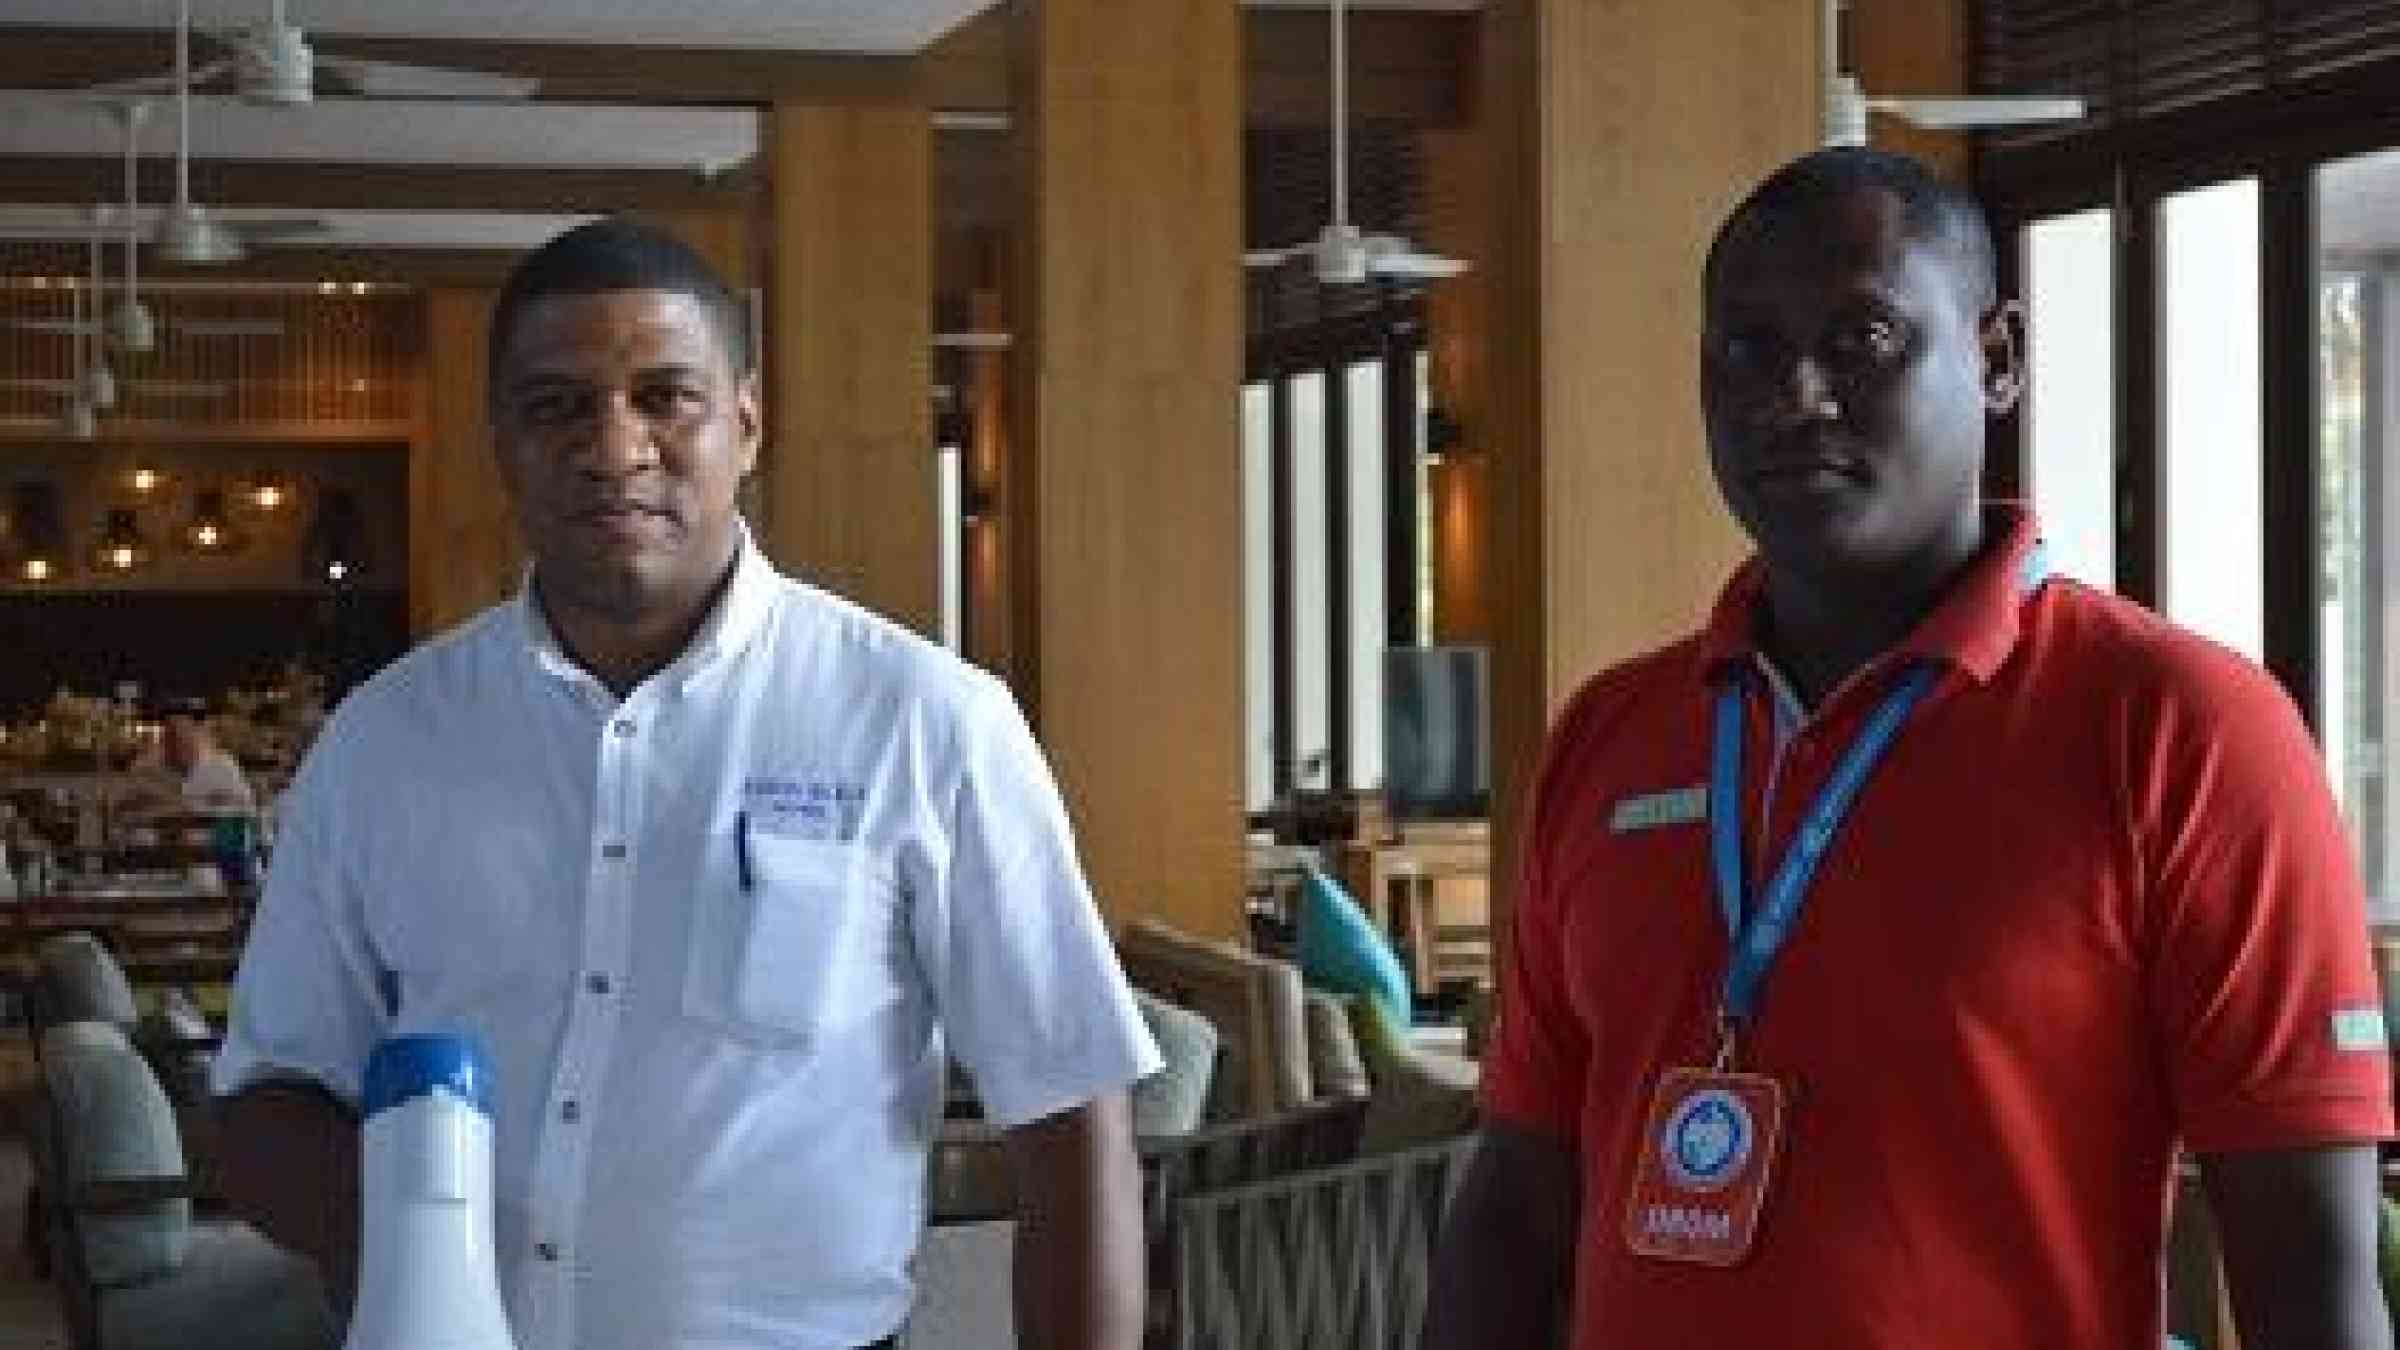 Evacuation of the Eden Bleu hotel as part of the tsunami drill in the Seychelles today under the direction of Mr. Jaime Barra, head of hotel security and safety, and Mr. Henry Moustache of the Division of  Risk and Disaster Management